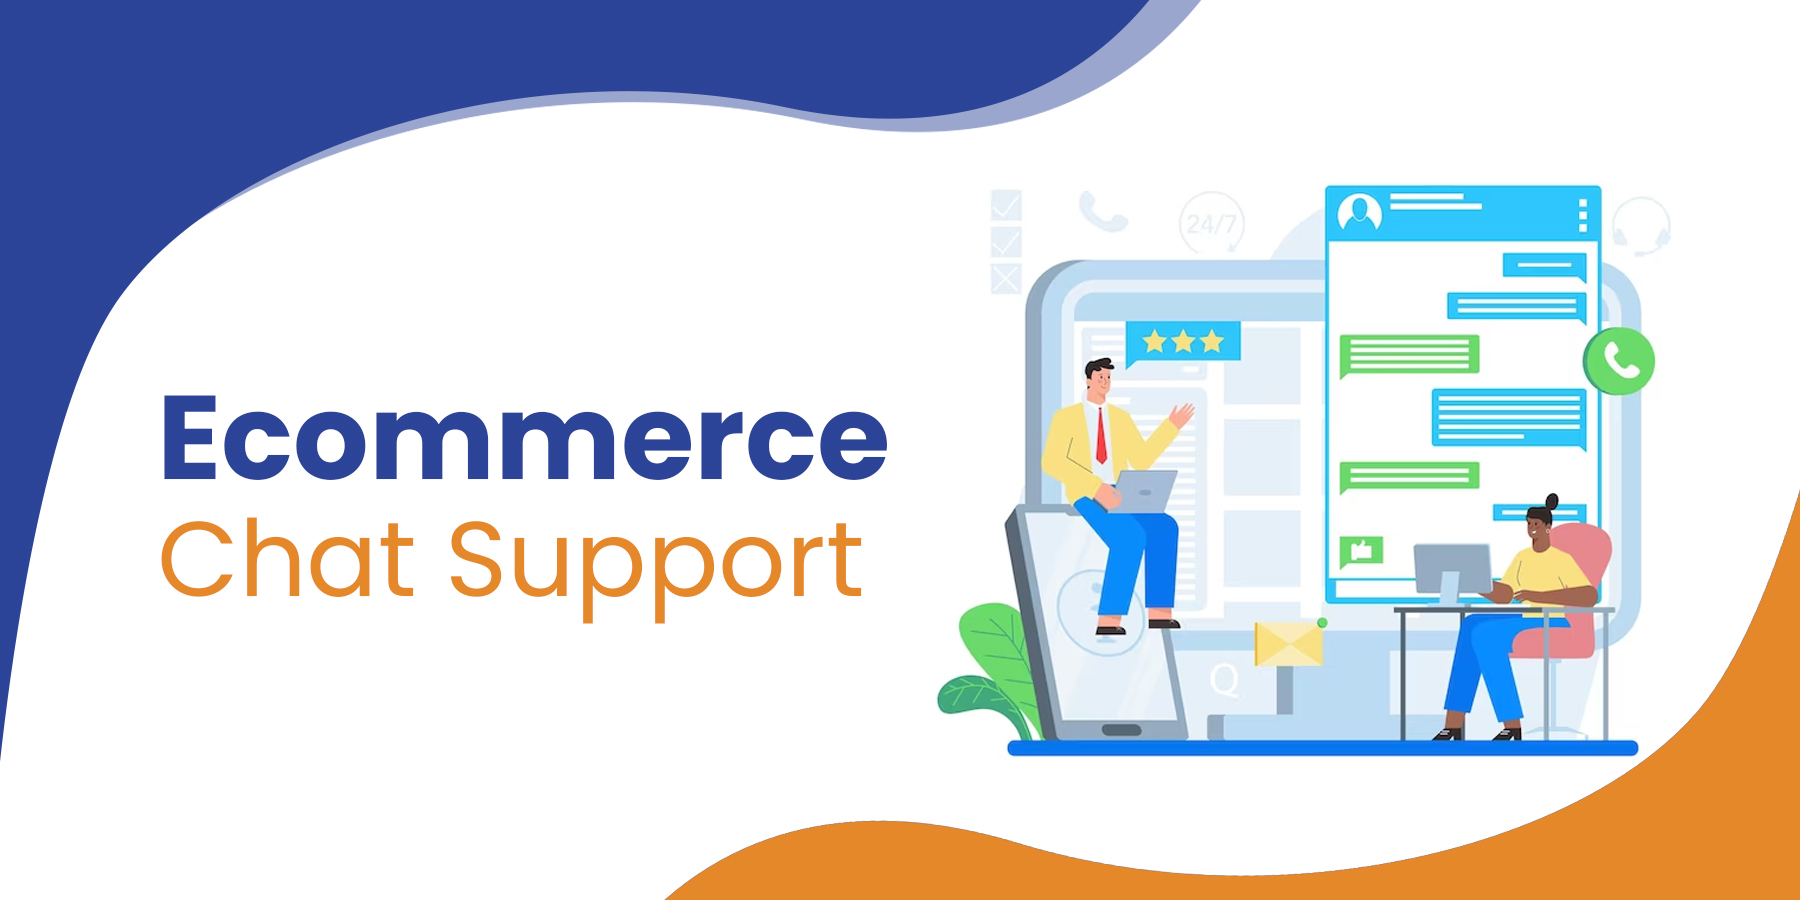 Ecommerce Chat Support